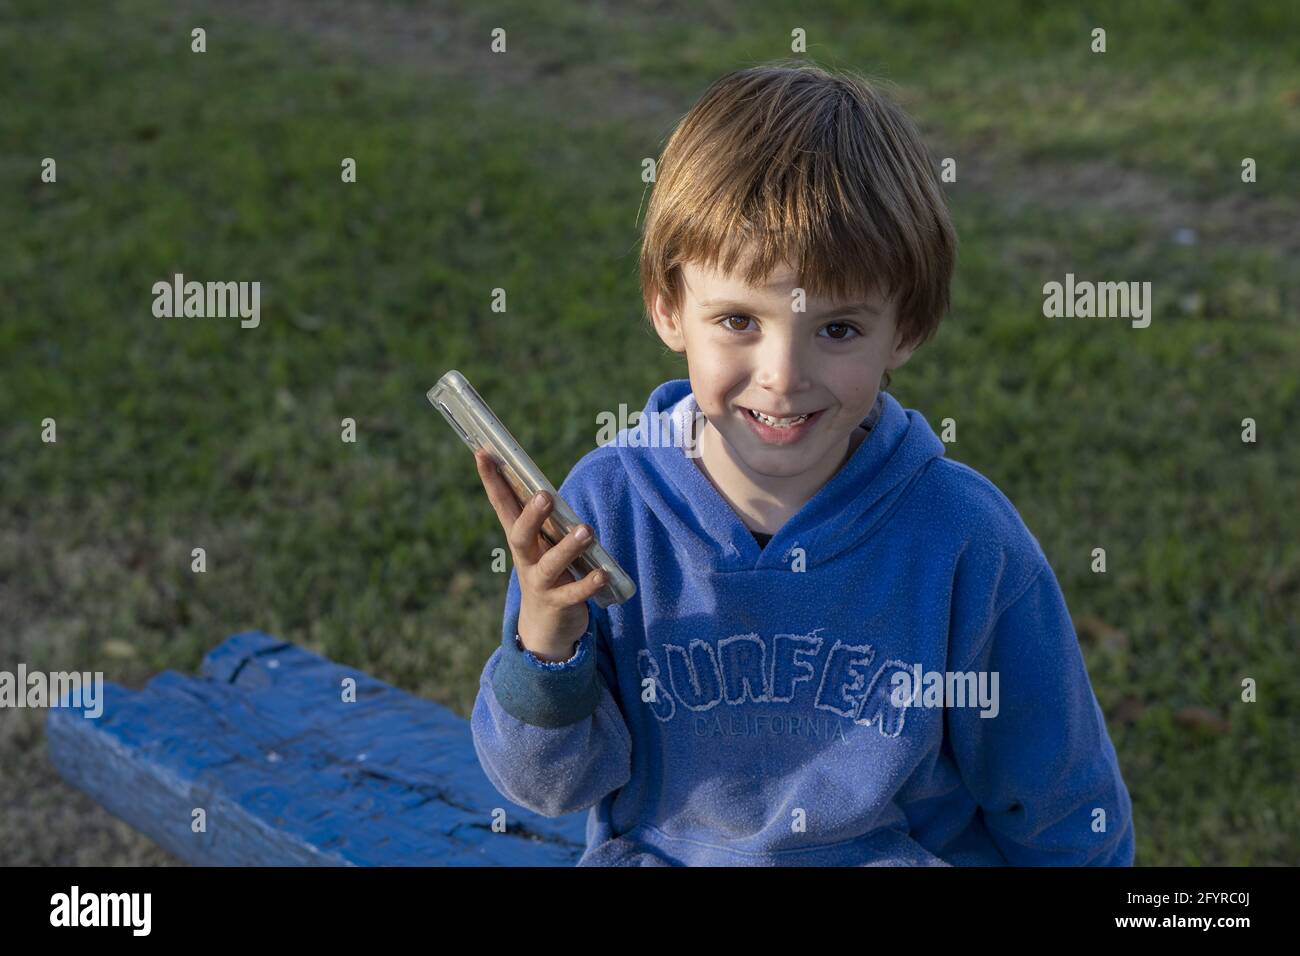 holding with Photo Stock boy Alamy face and with - phone smiley park sitting Caucasian on a in a bench blue a hoodie